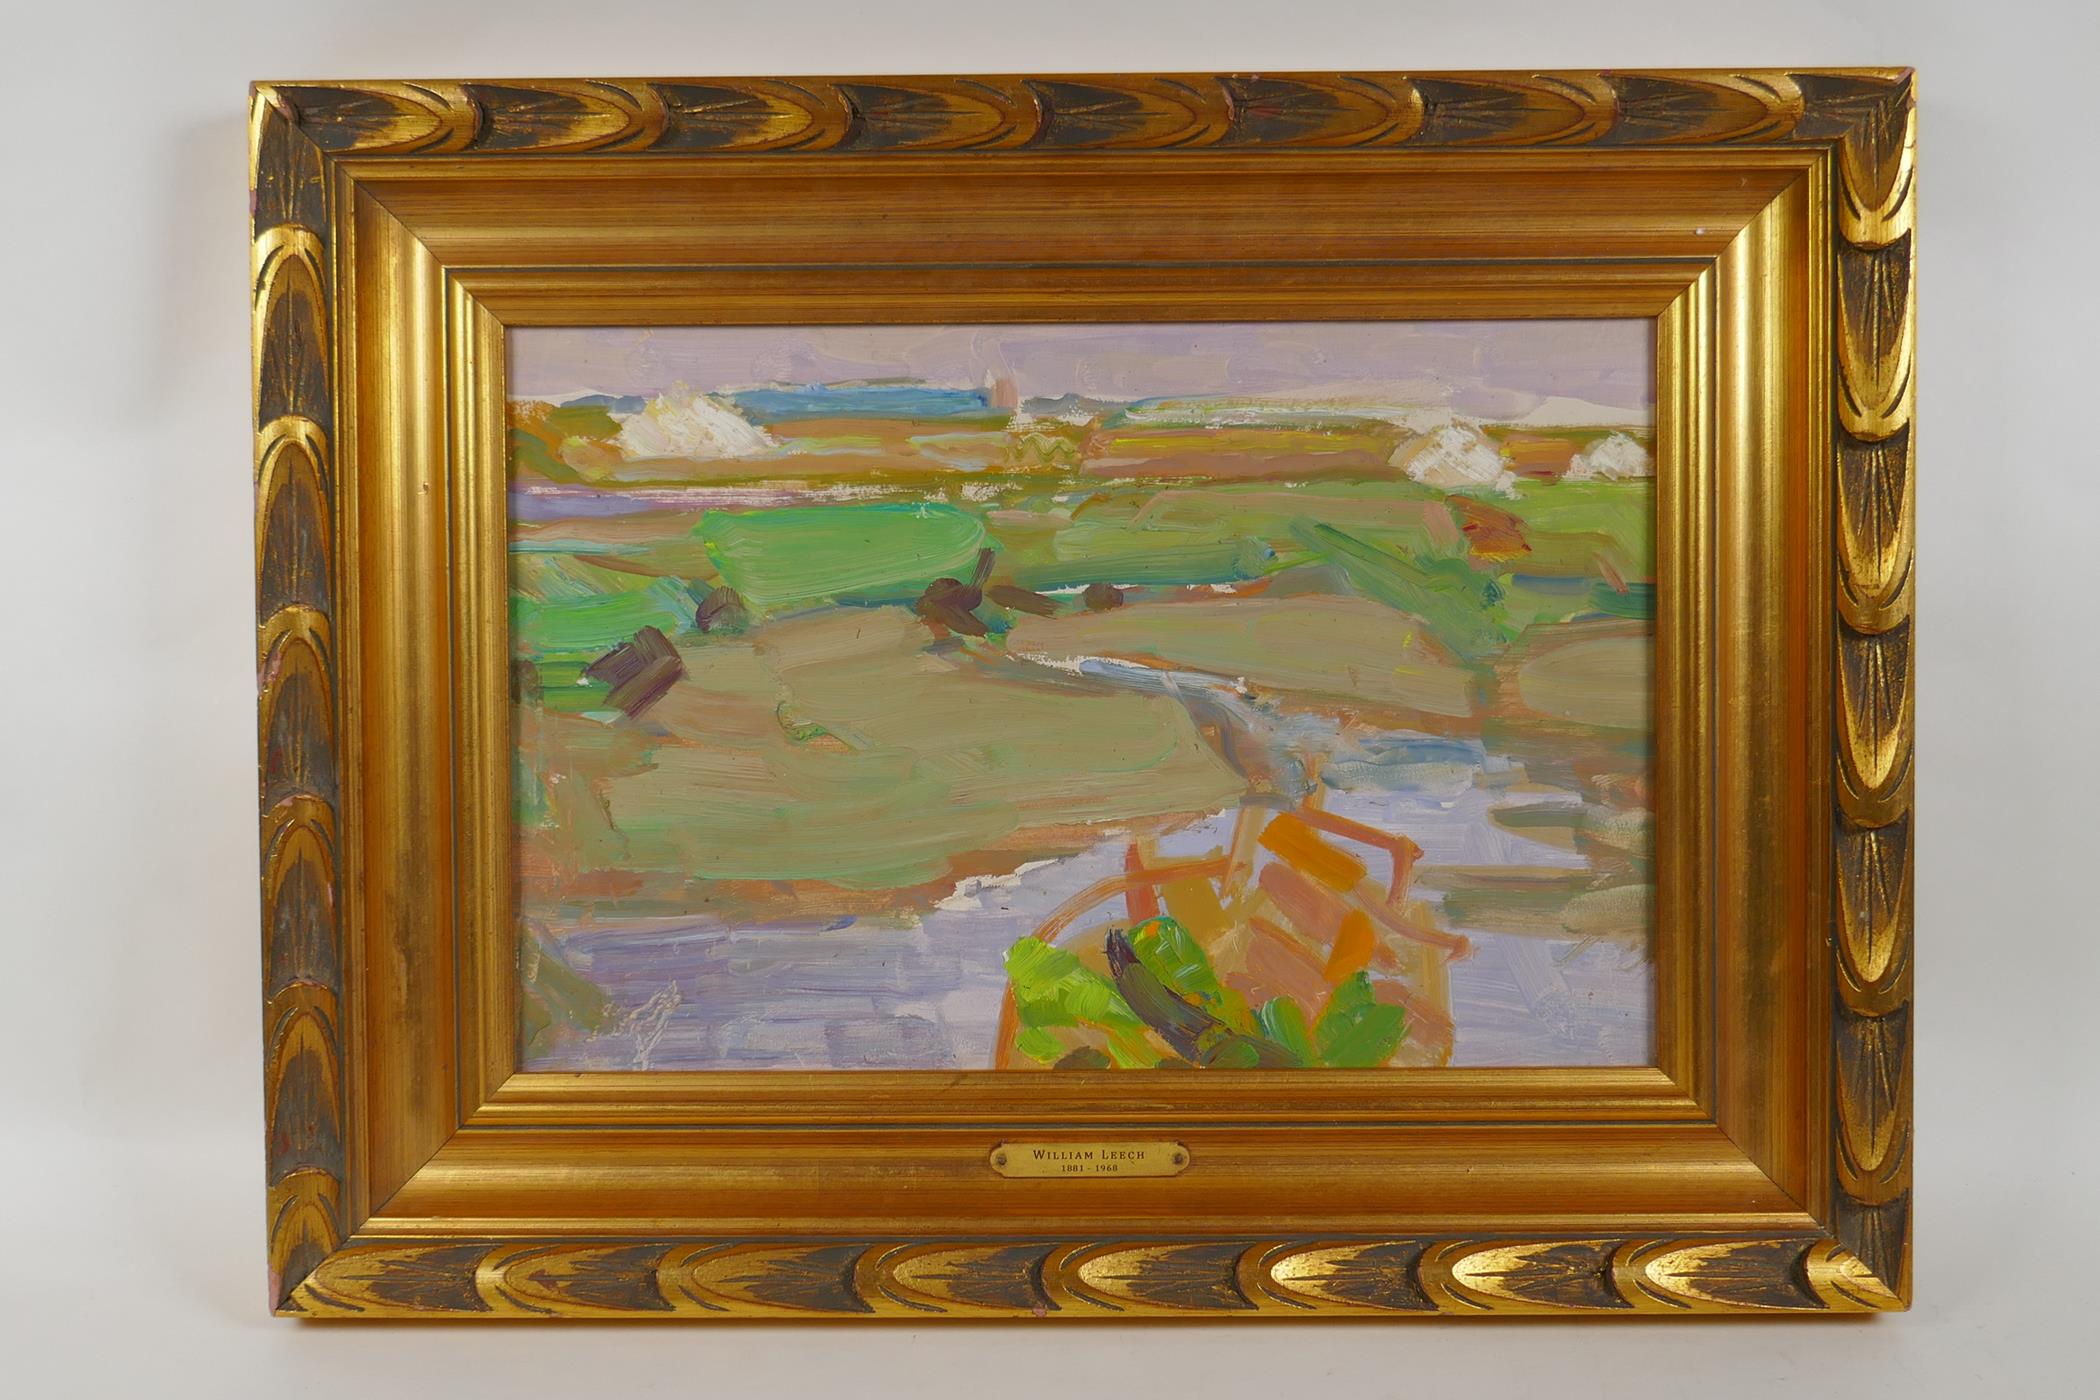 Coastal scene with boat wreck to foreground, inscribed on frame plaque 'William Leech', oil on - Image 2 of 3